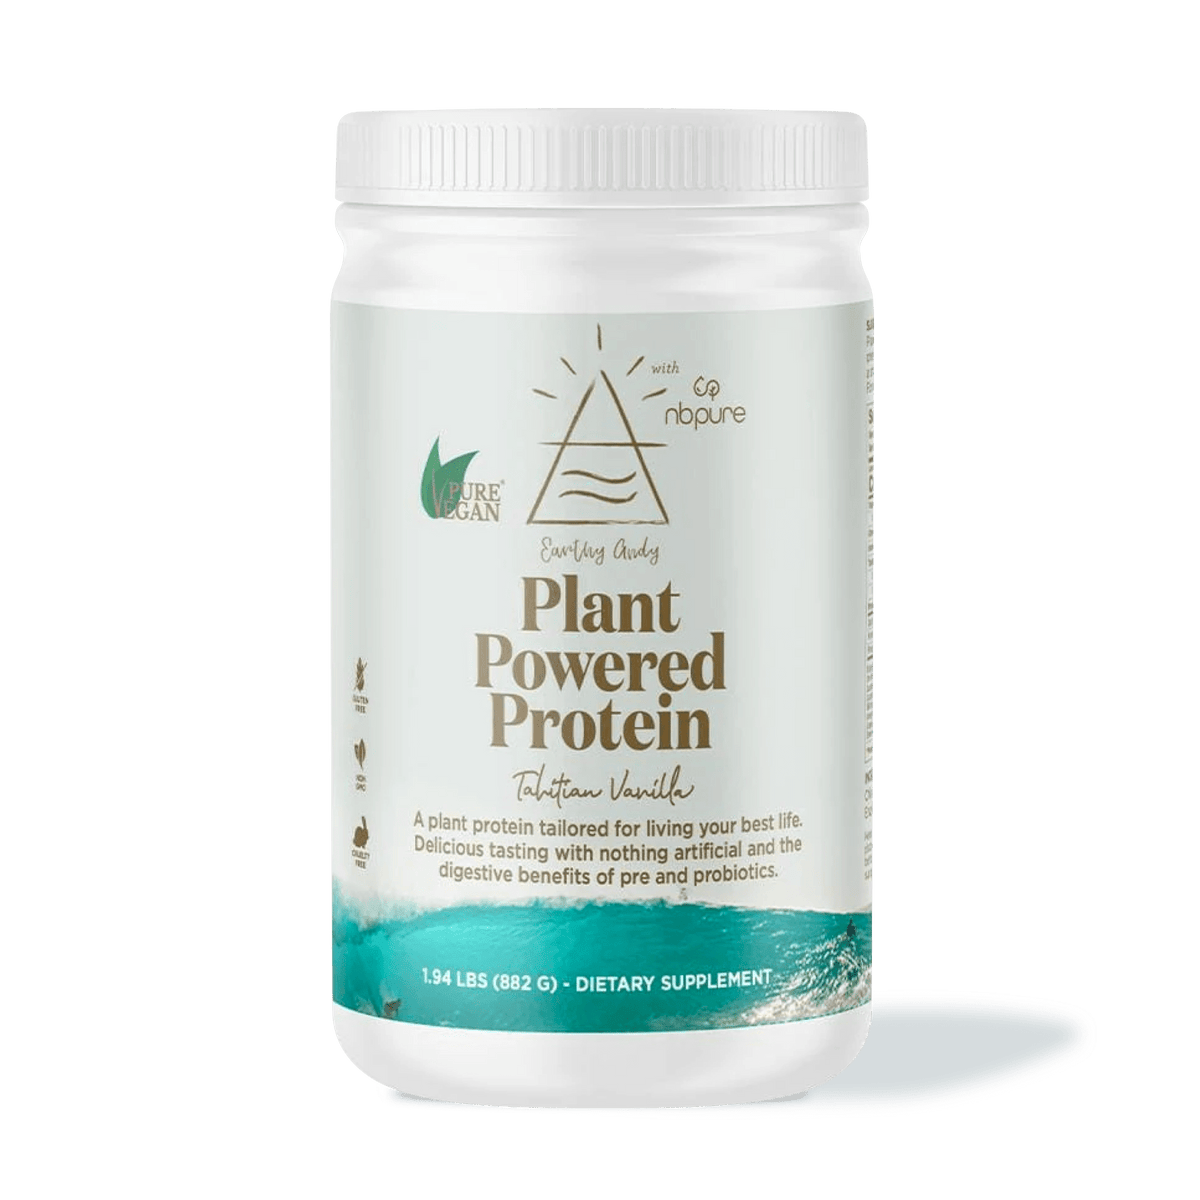 NB Pure Earthy Andy Plant Powered Protein